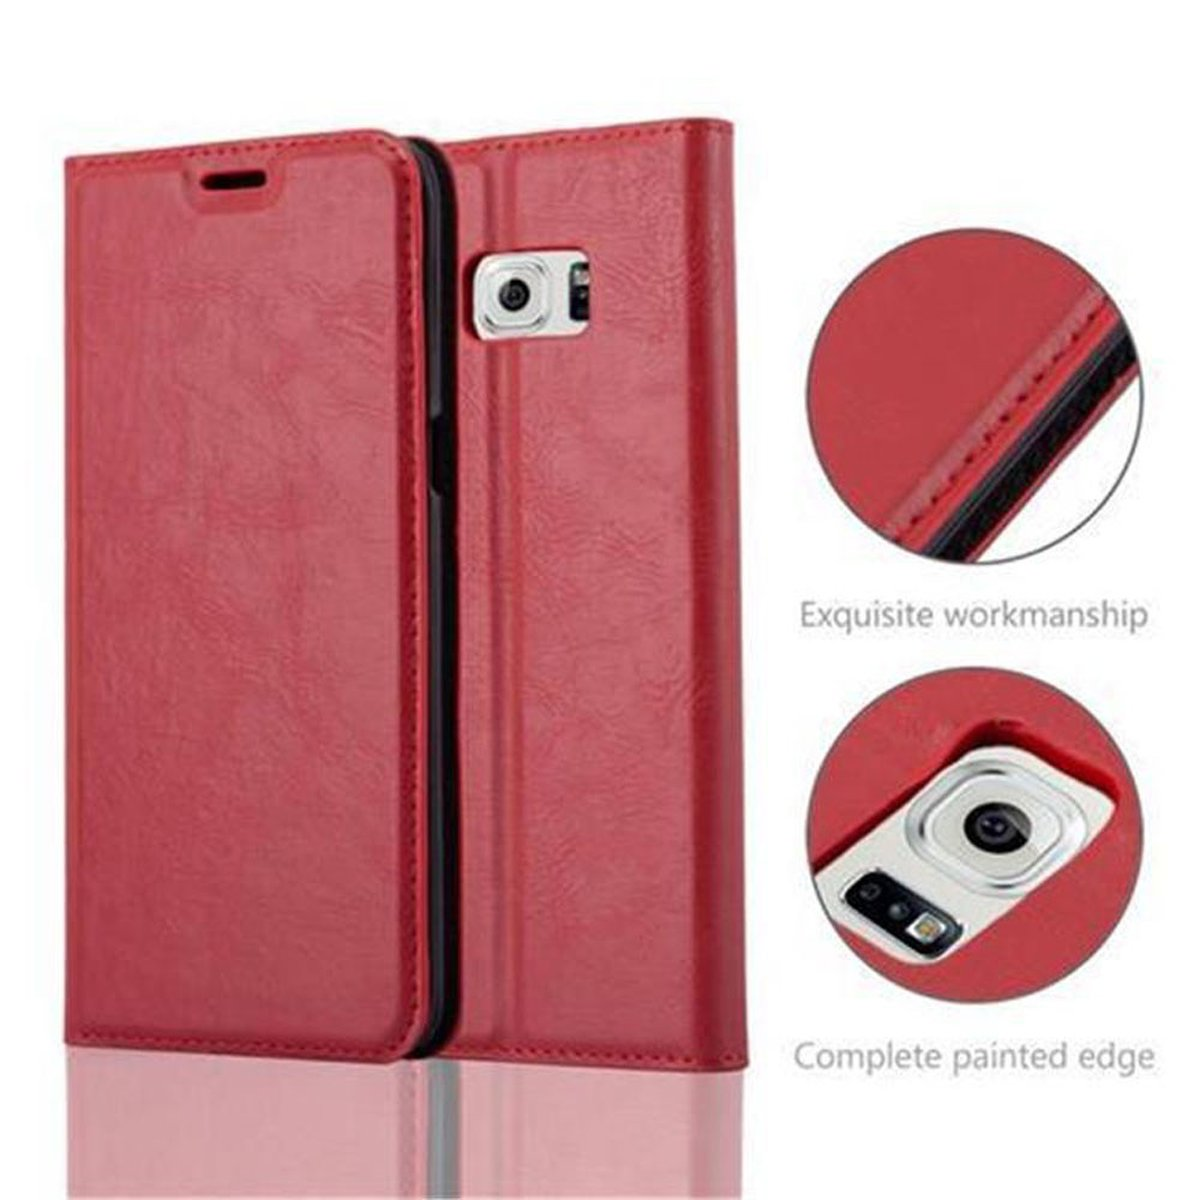 EDGE APFEL PLUS, S6 CADORABO Book Bookcover, Invisible Magnet, ROT Hülle Samsung, Galaxy